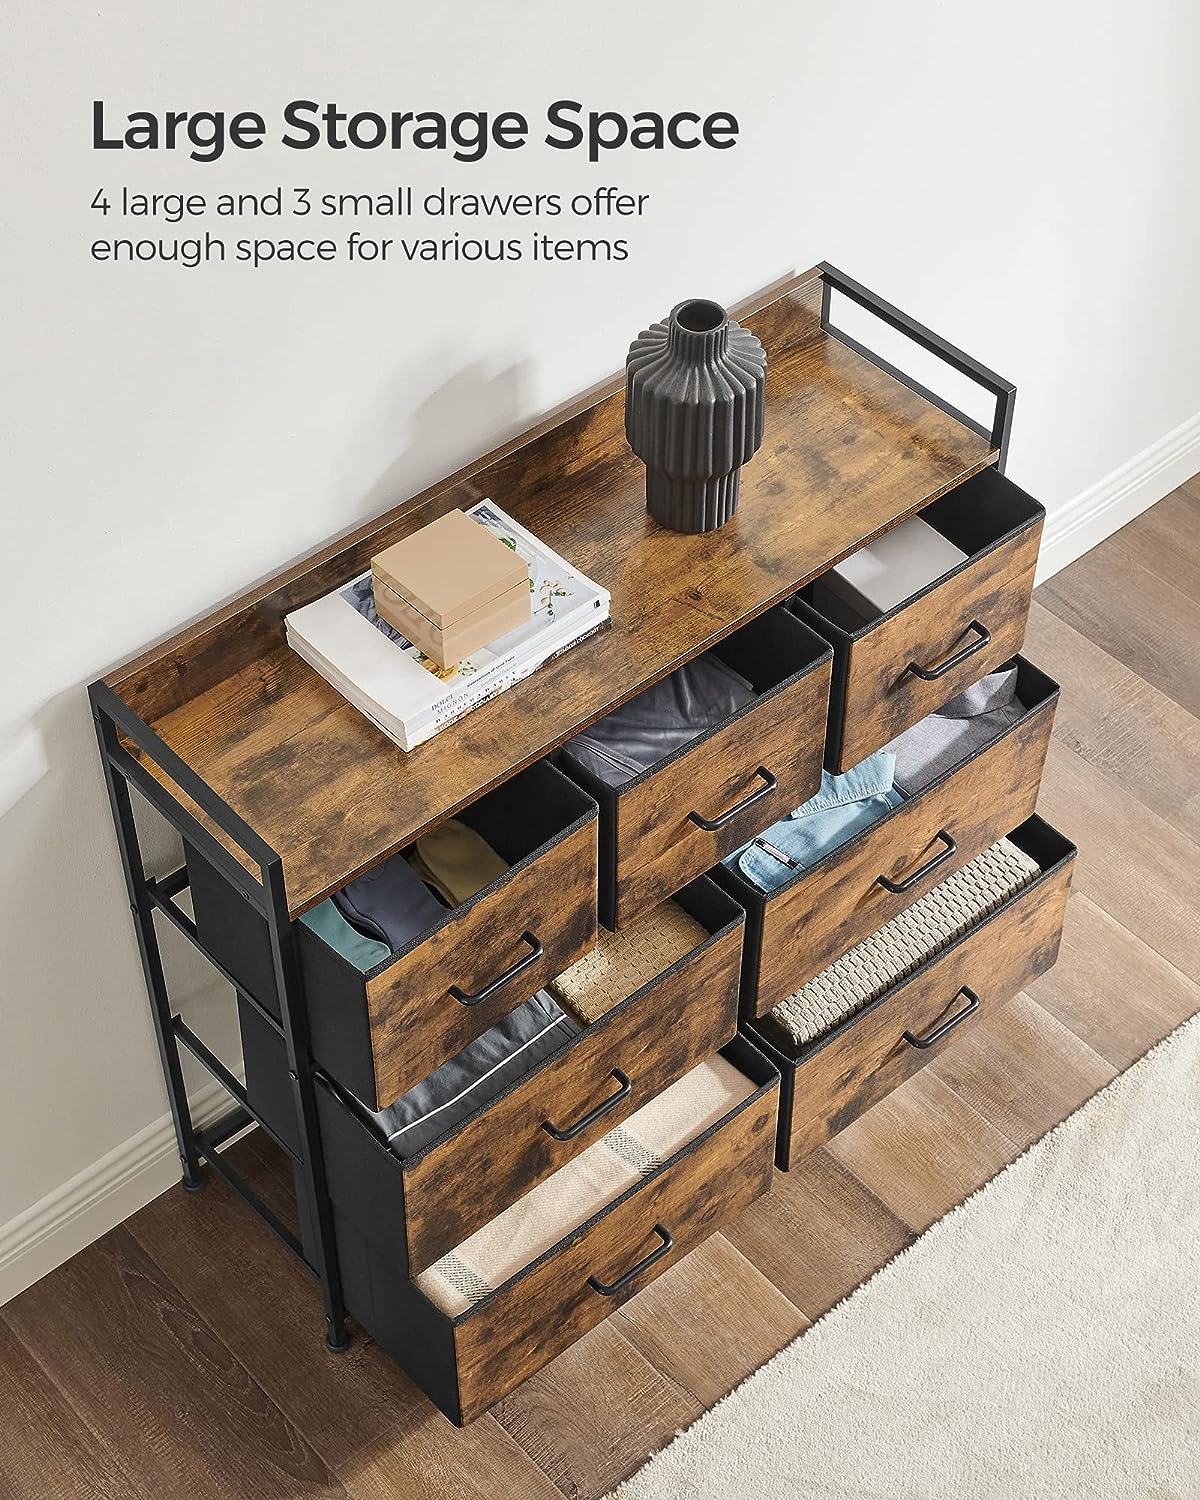 SONGMICS Chest of Drawers, Bedroom Cabinet, 7 Fabric Drawers with Handles, Metal Frame, Industrial Design, Rustic Brown and Black LTS137B01